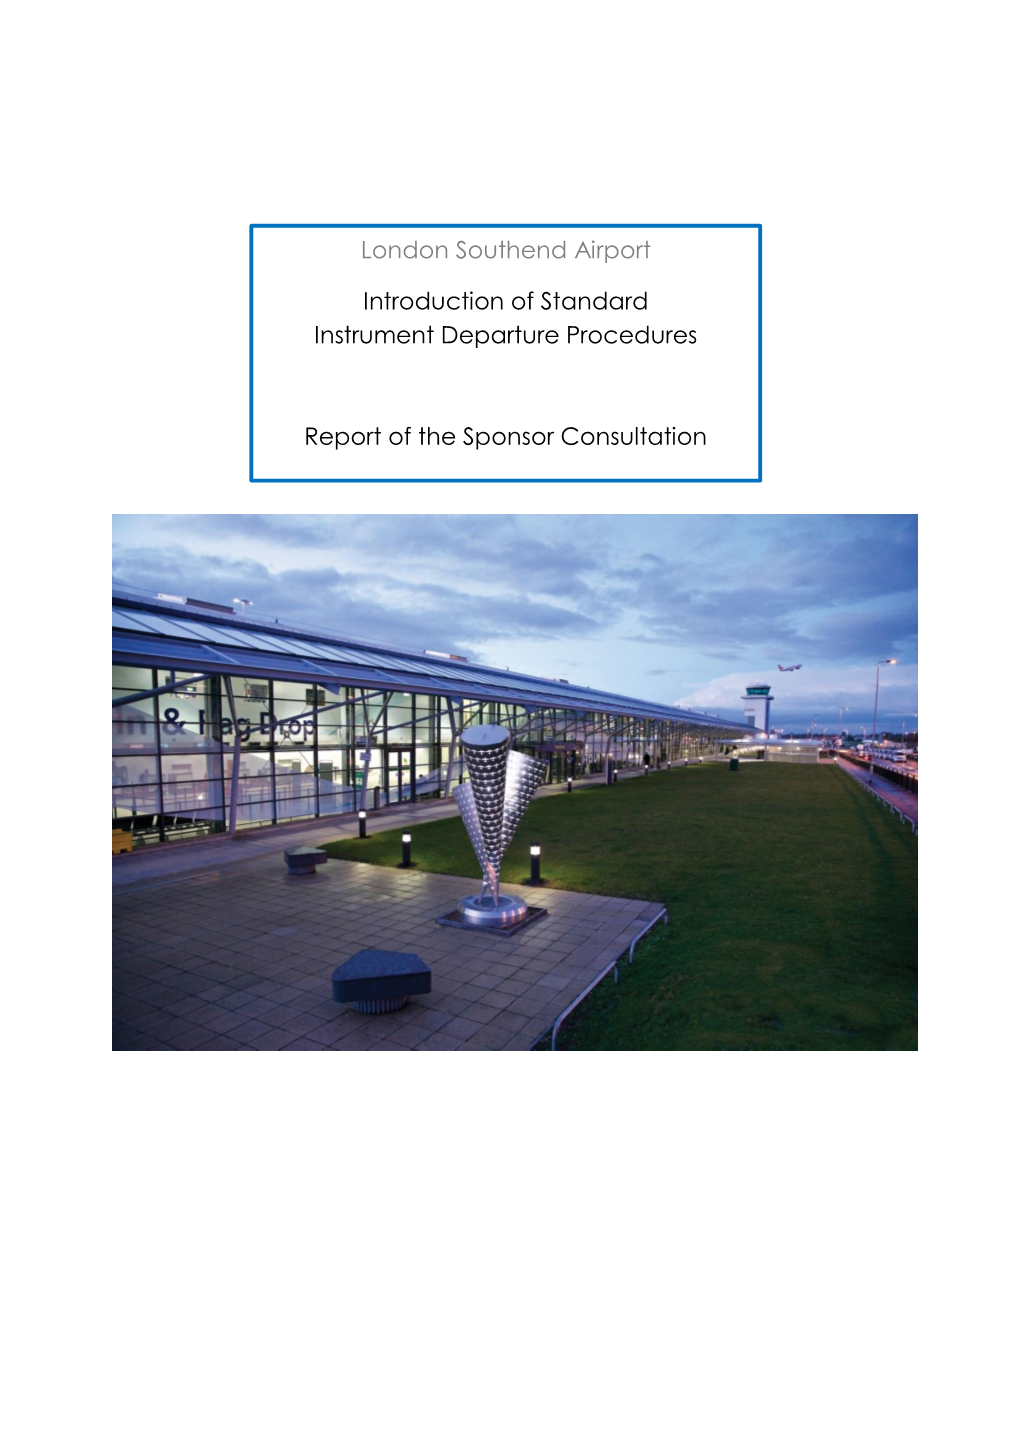 London Southend Airport Introduction of Standard Instrument Departure